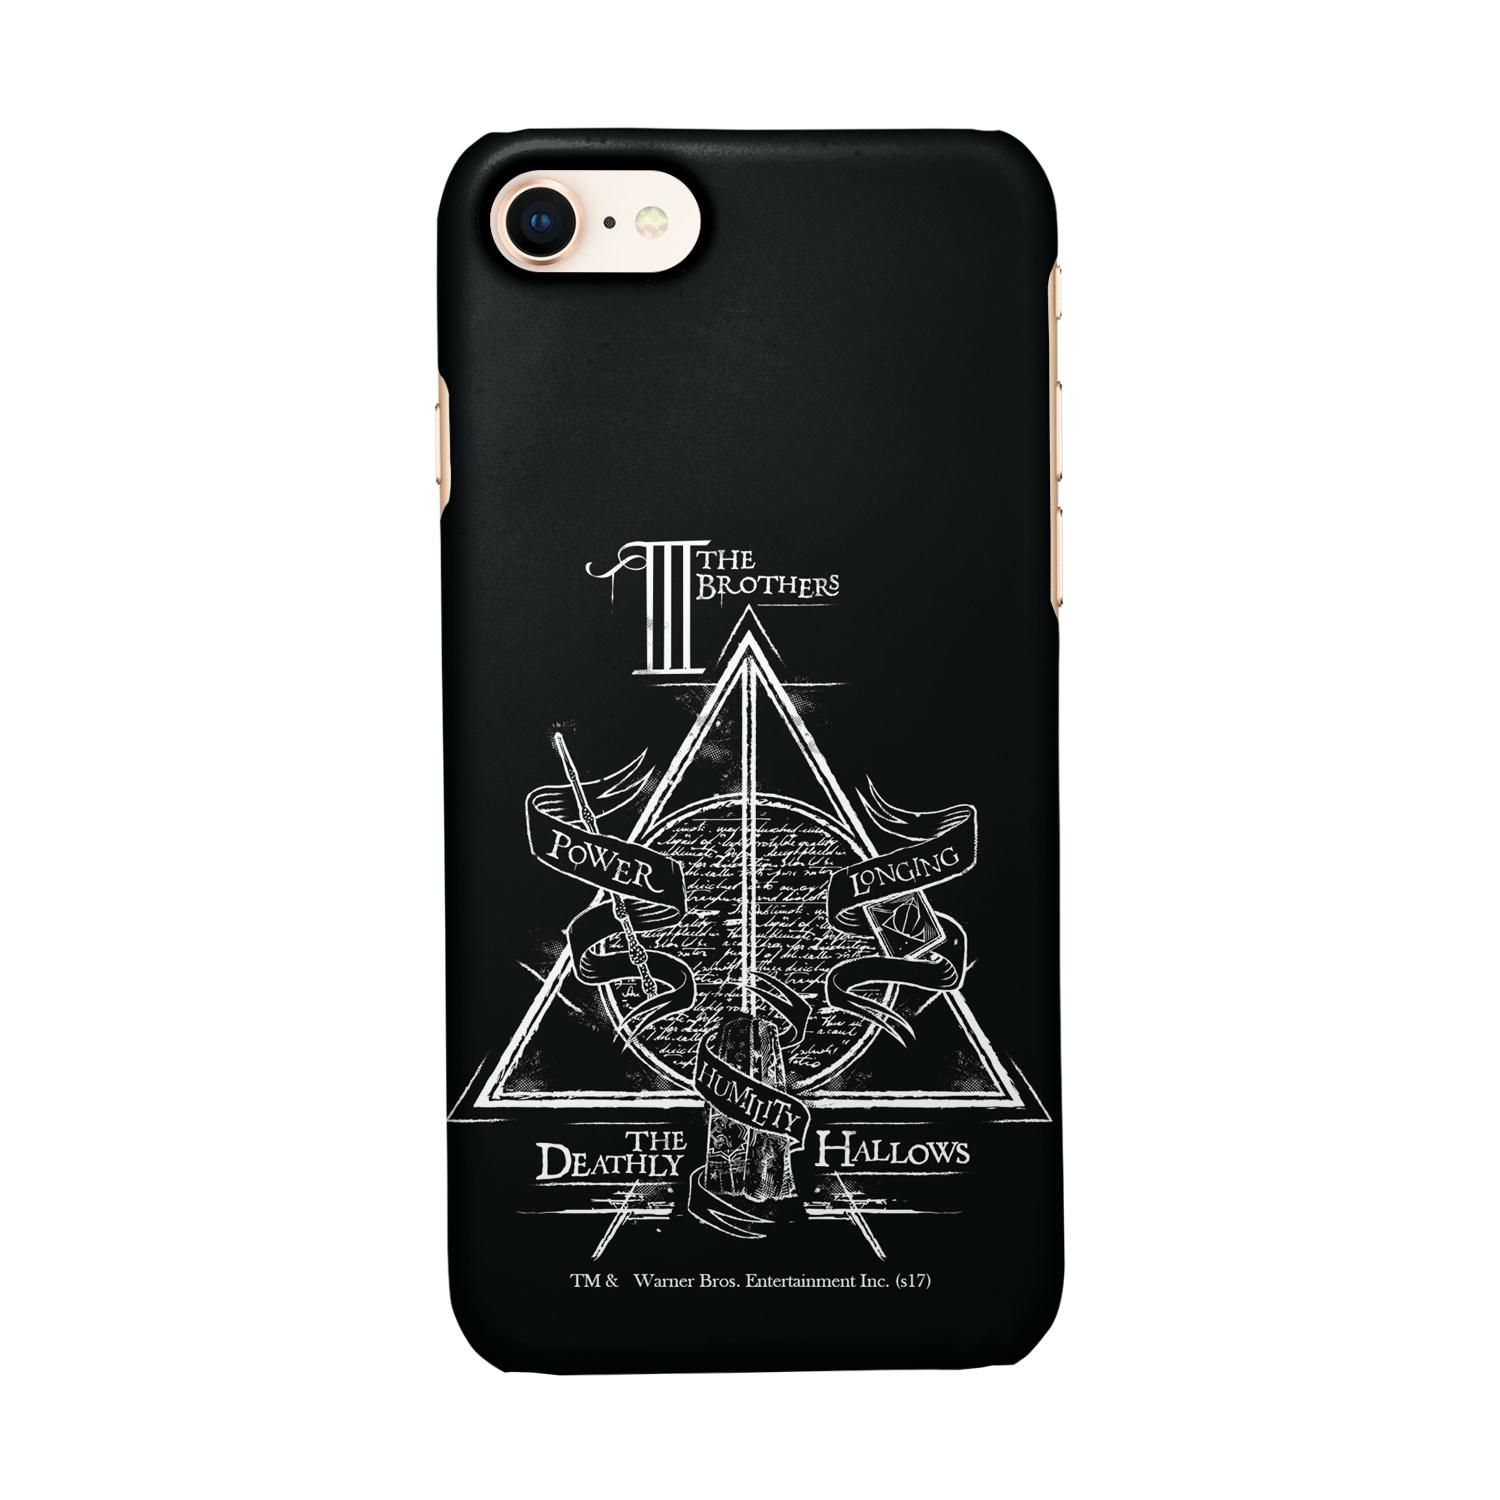 Buy The Deathly Hallows - Sleek Phone Case for iPhone 7 Online